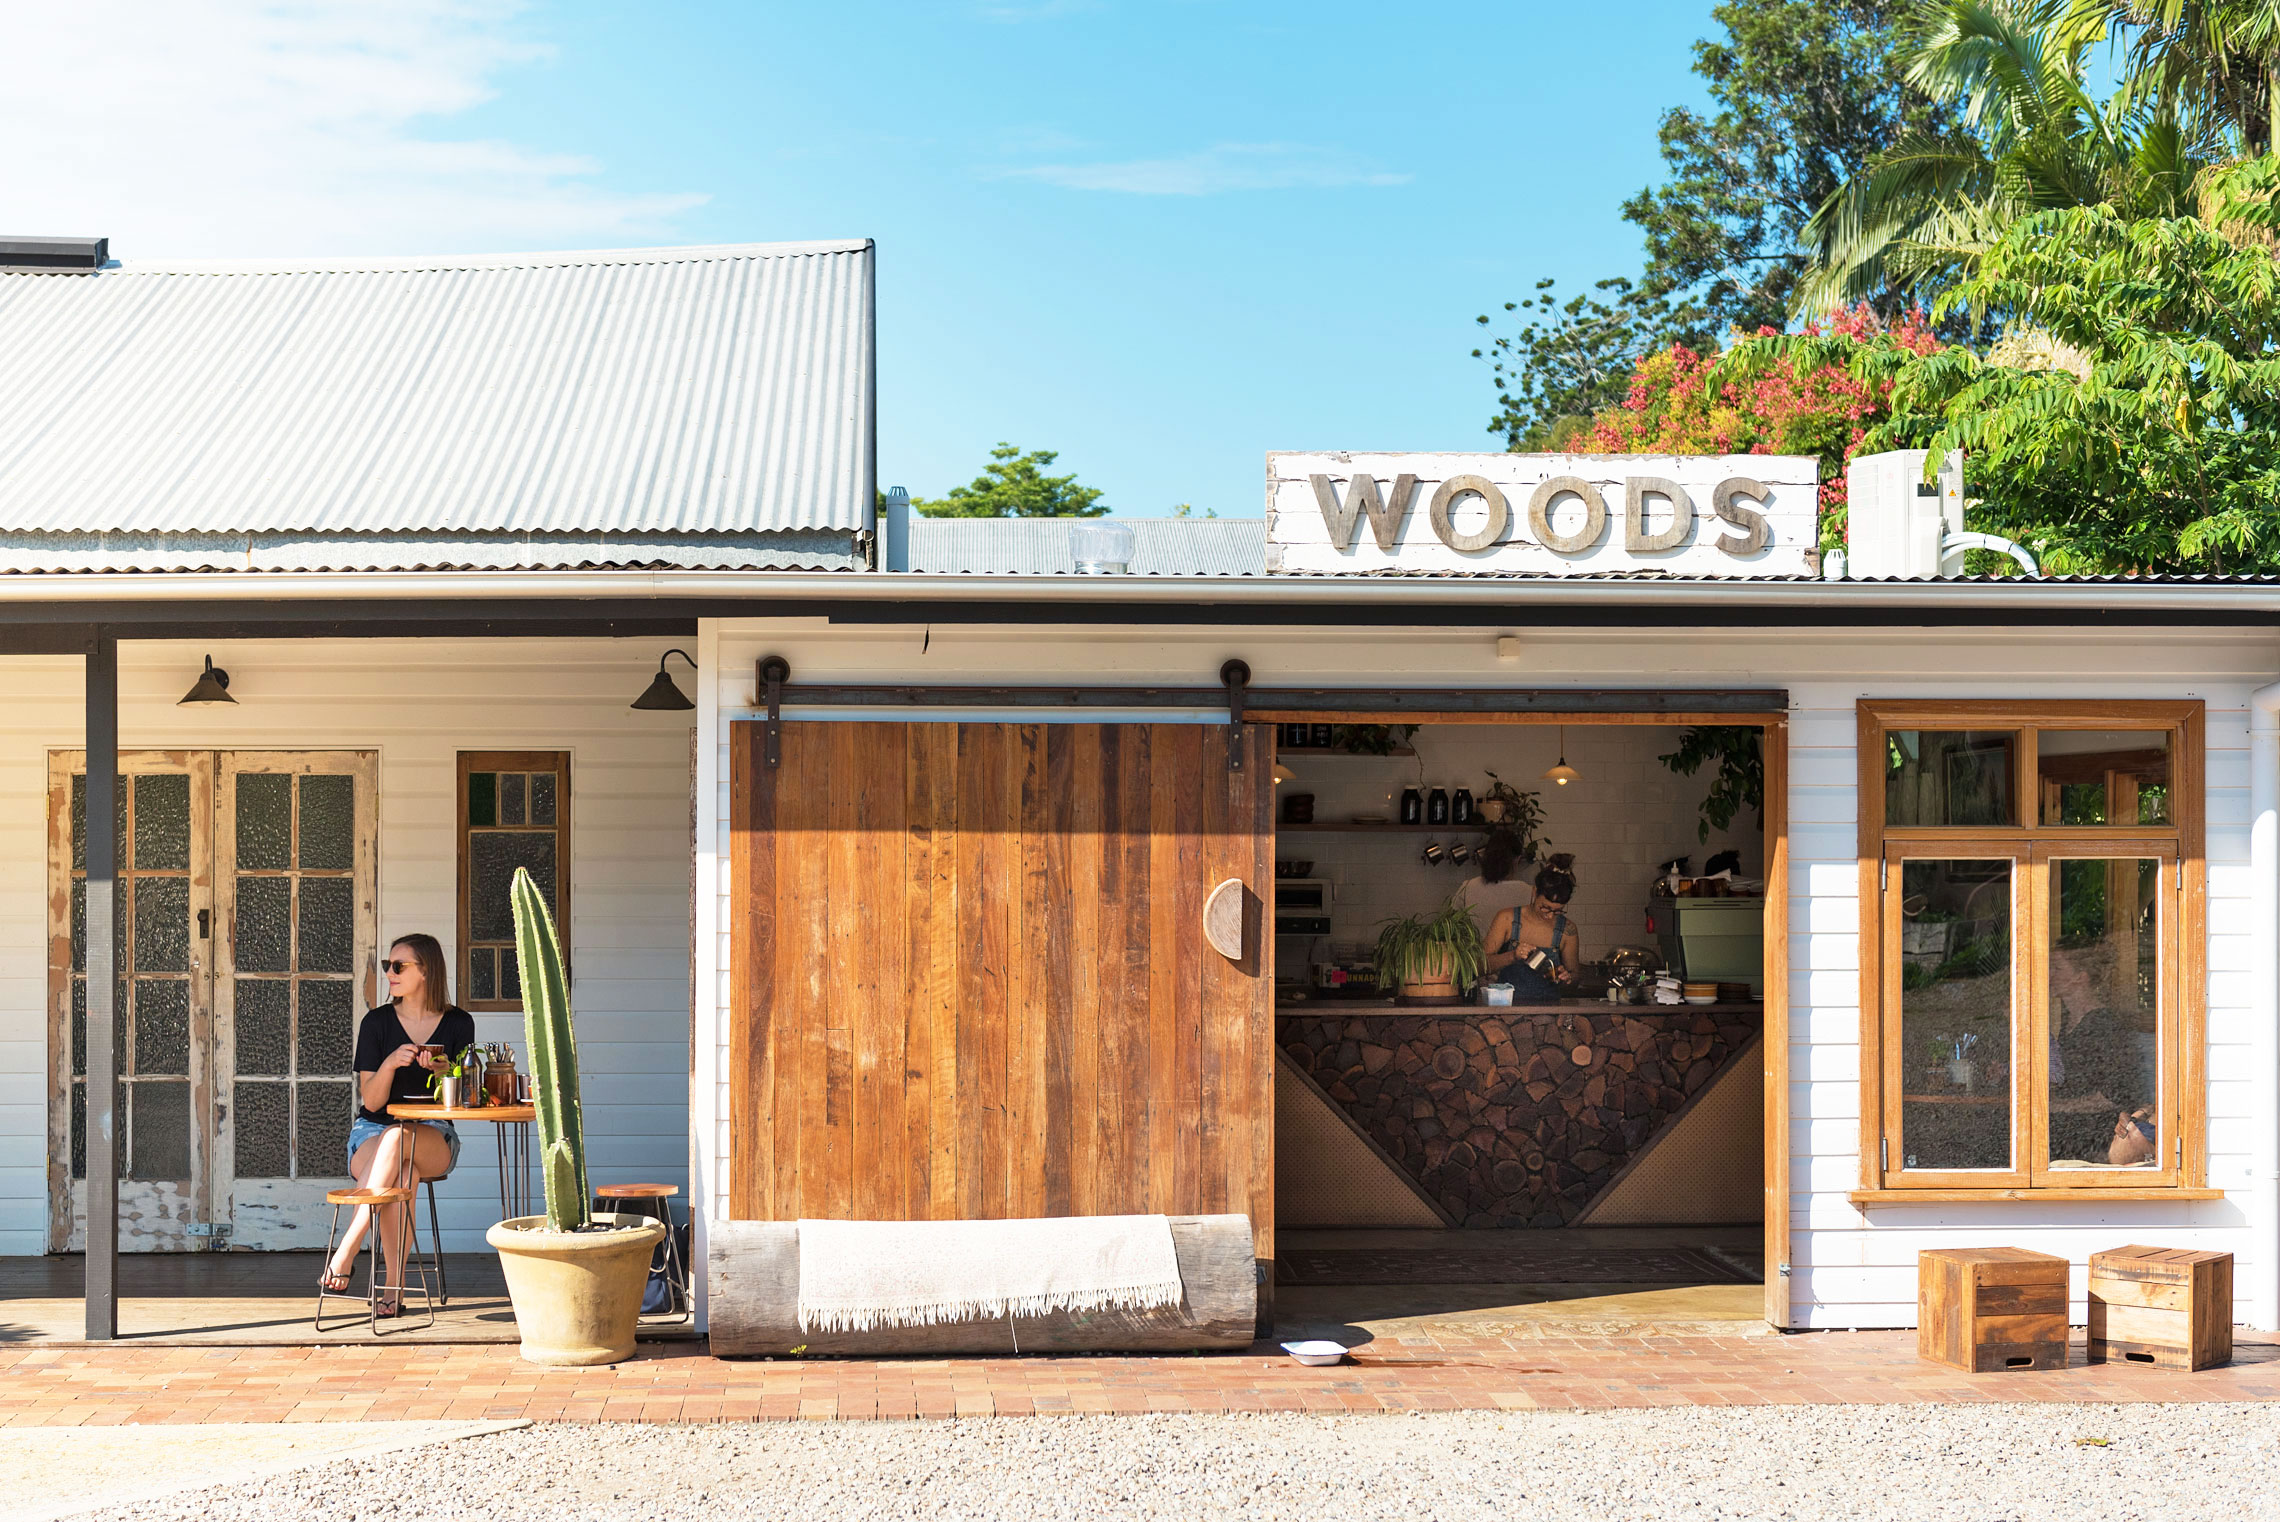 A Foodie's Guide to Byron Bay, Woods, Bangalow